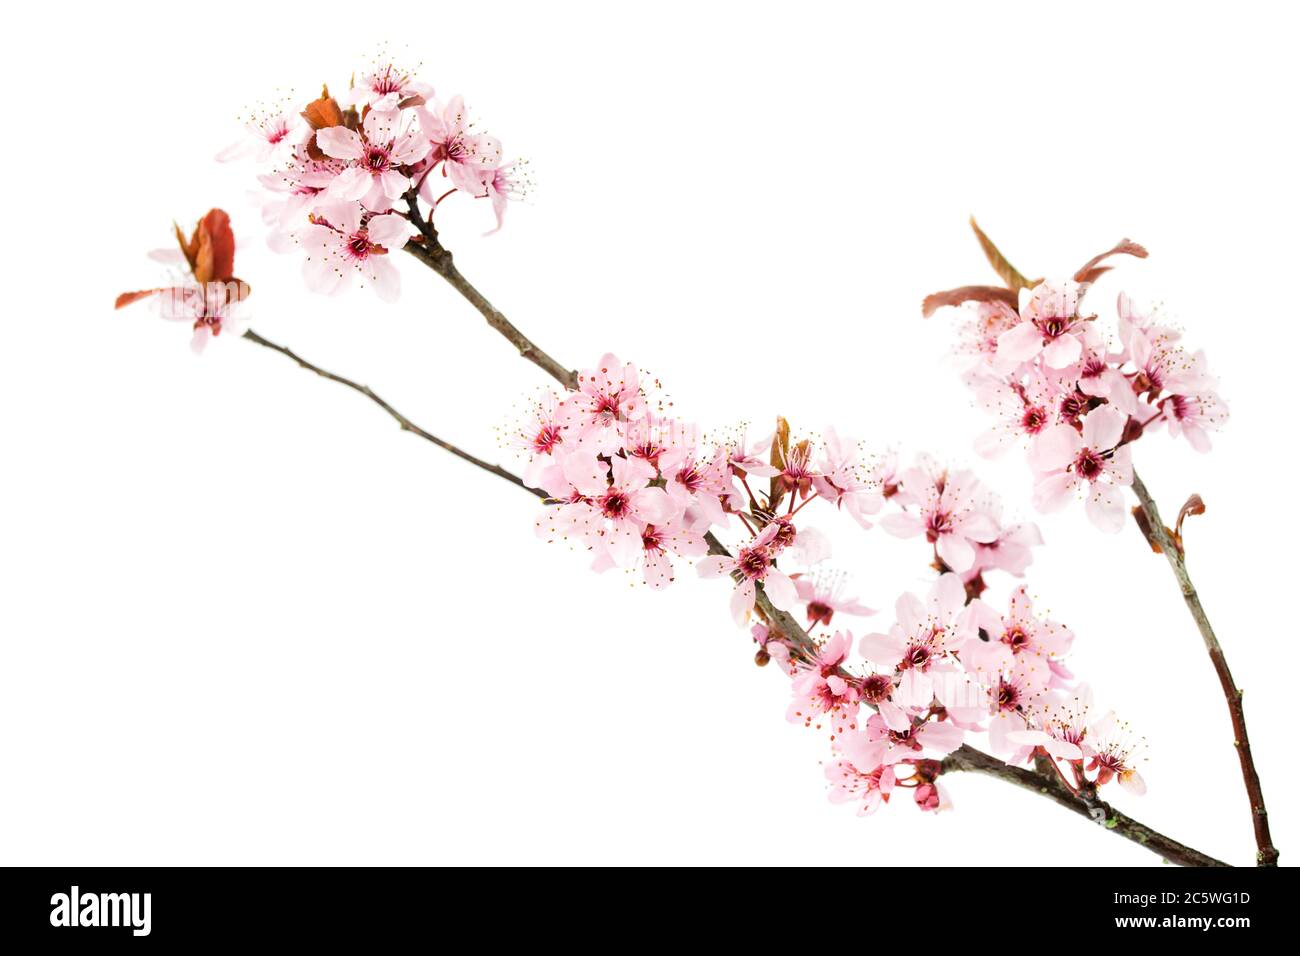 Branch of blooming pink cherry tree, sakura flowers isolated on white background Stock Photo